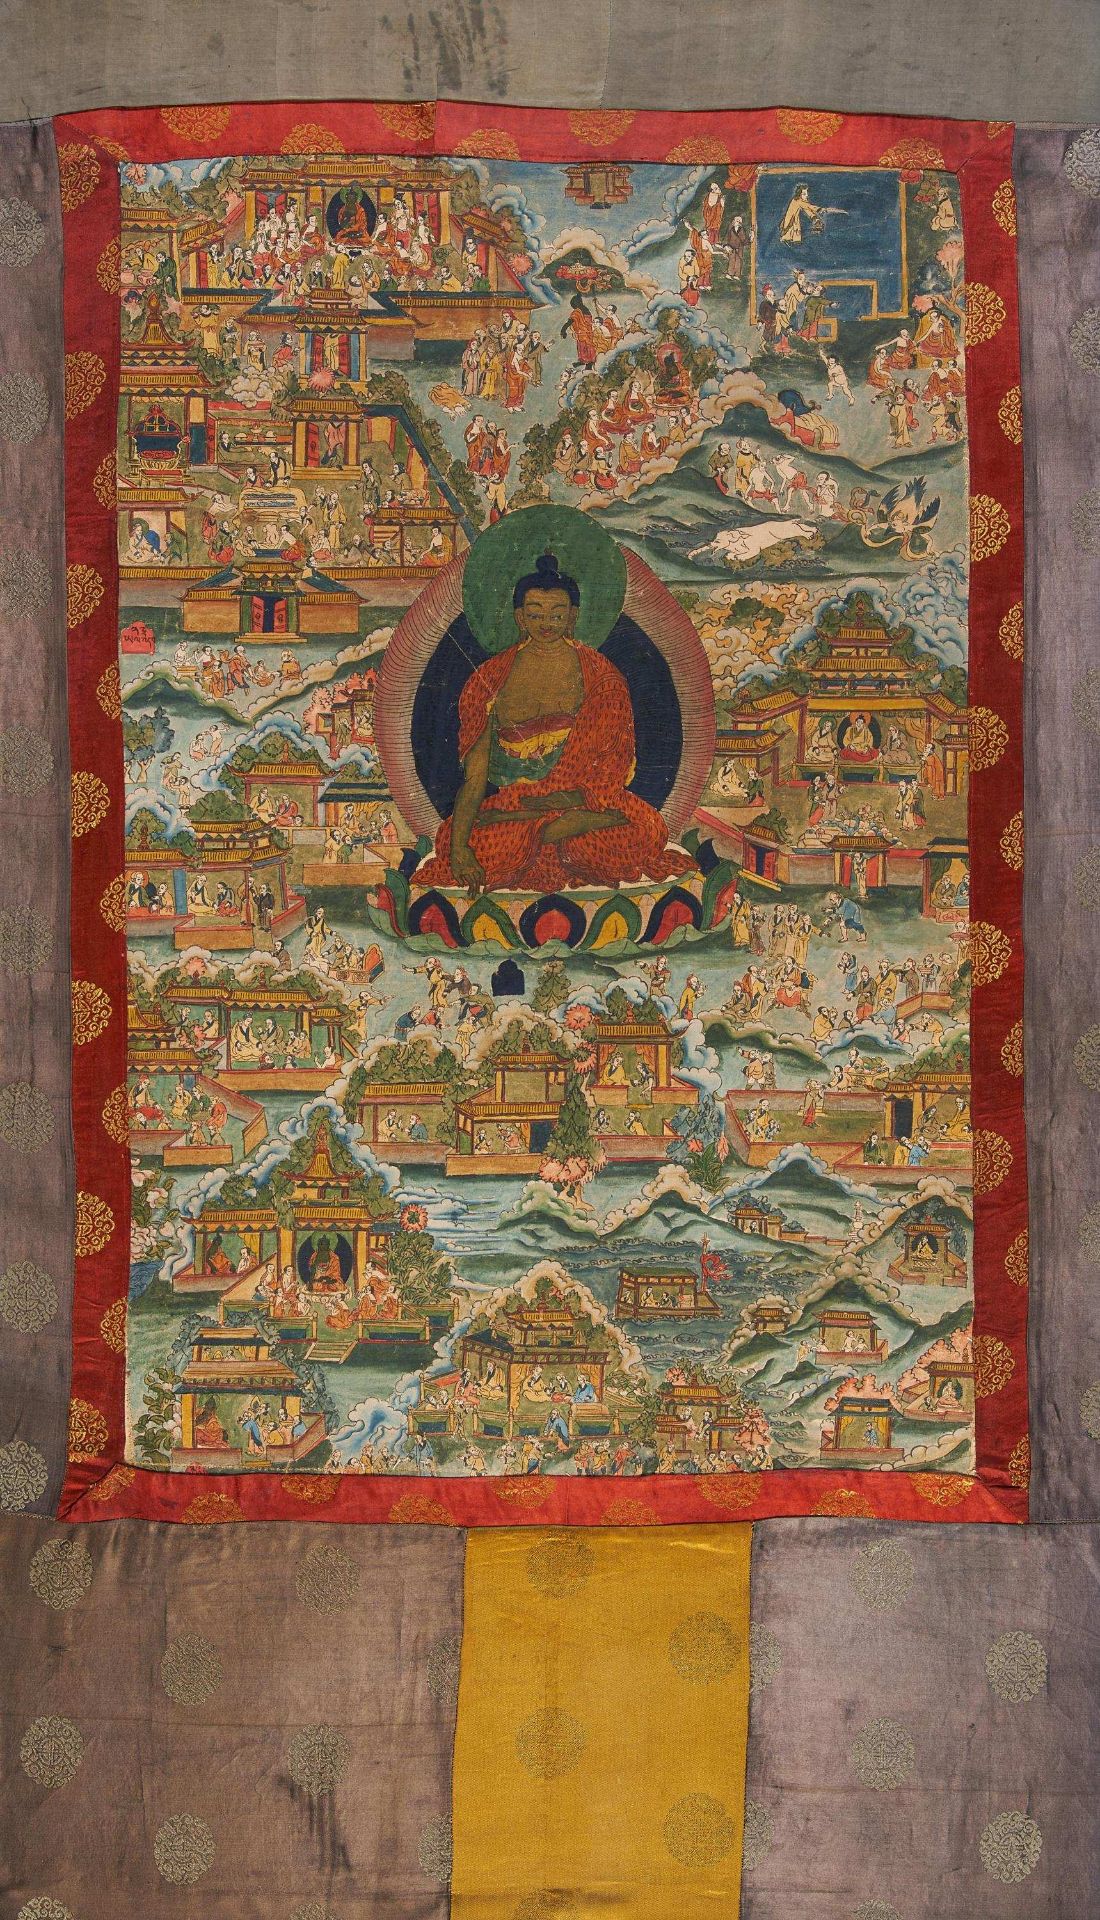 THANGKA OF BUDDHA SHAKYAMUNI. Nepal. 20th c. Colors and gold on fabric. Painted in expressive